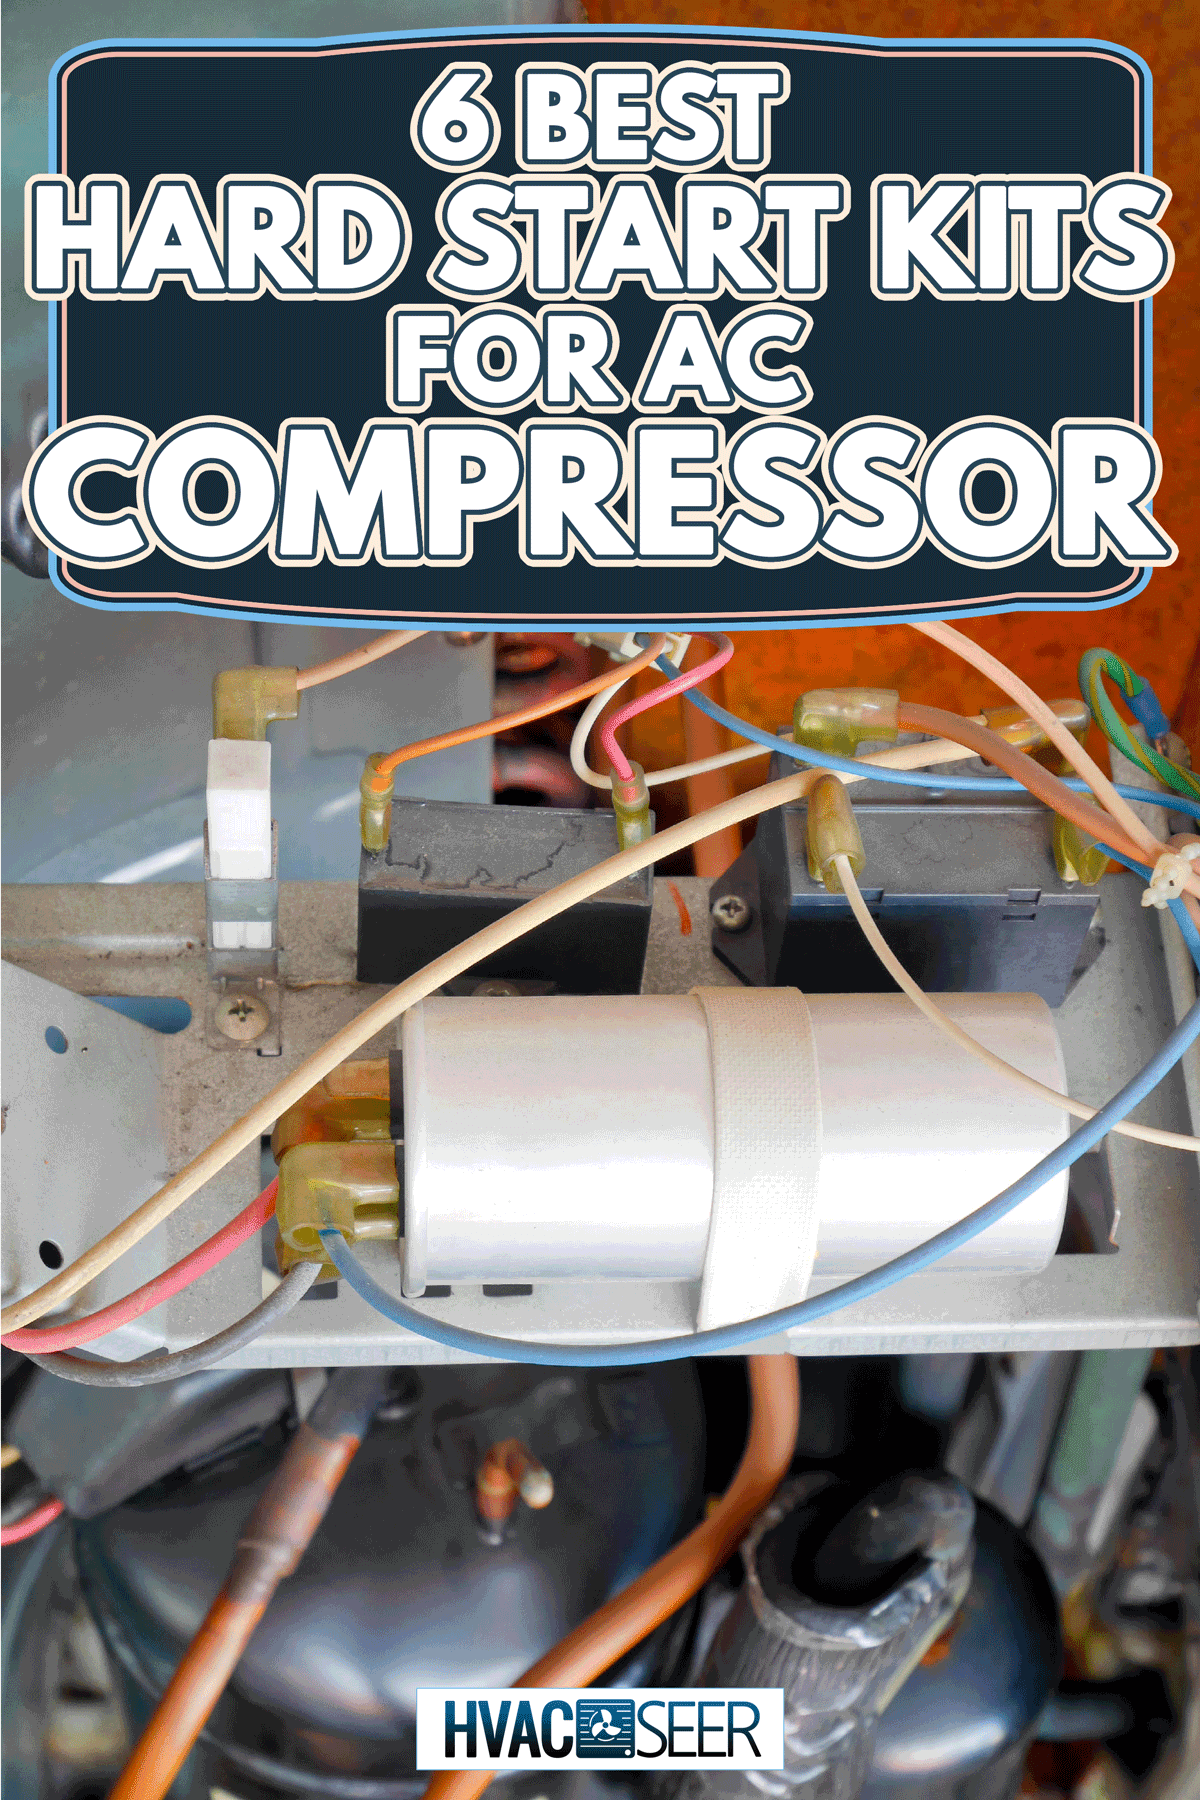 Inside the condenser unit of an air conditioner unit, 6 Best Hard Start Kits For AC Compressor